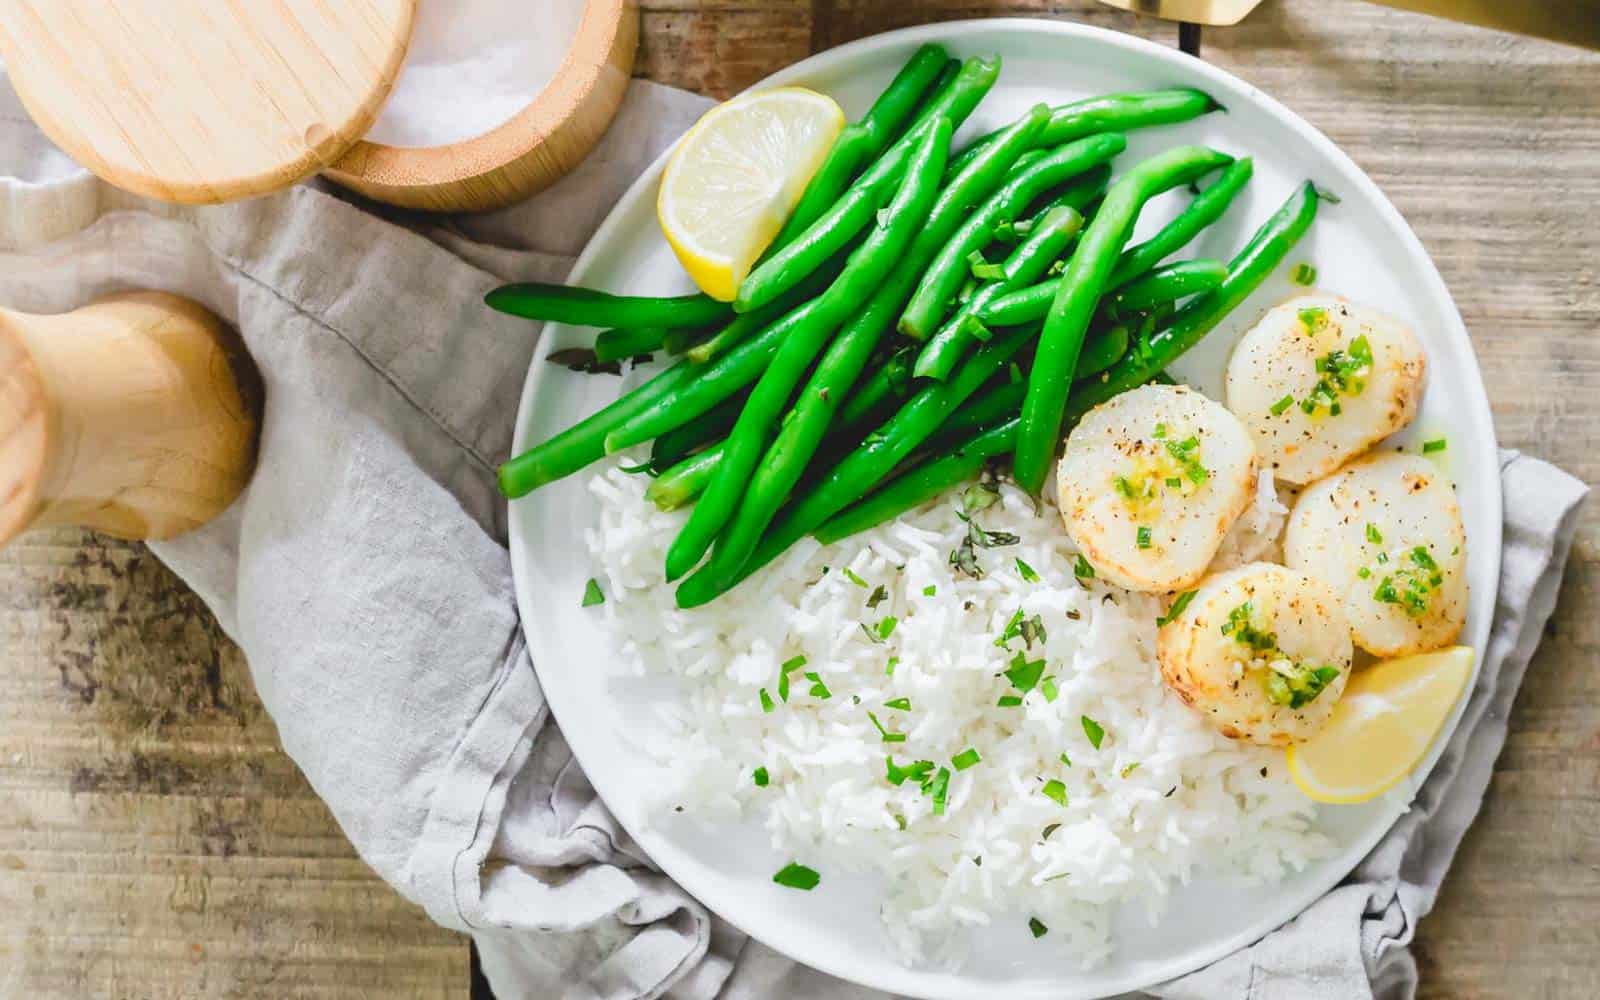 Air fryer scallops with green beans and rice on a plate.